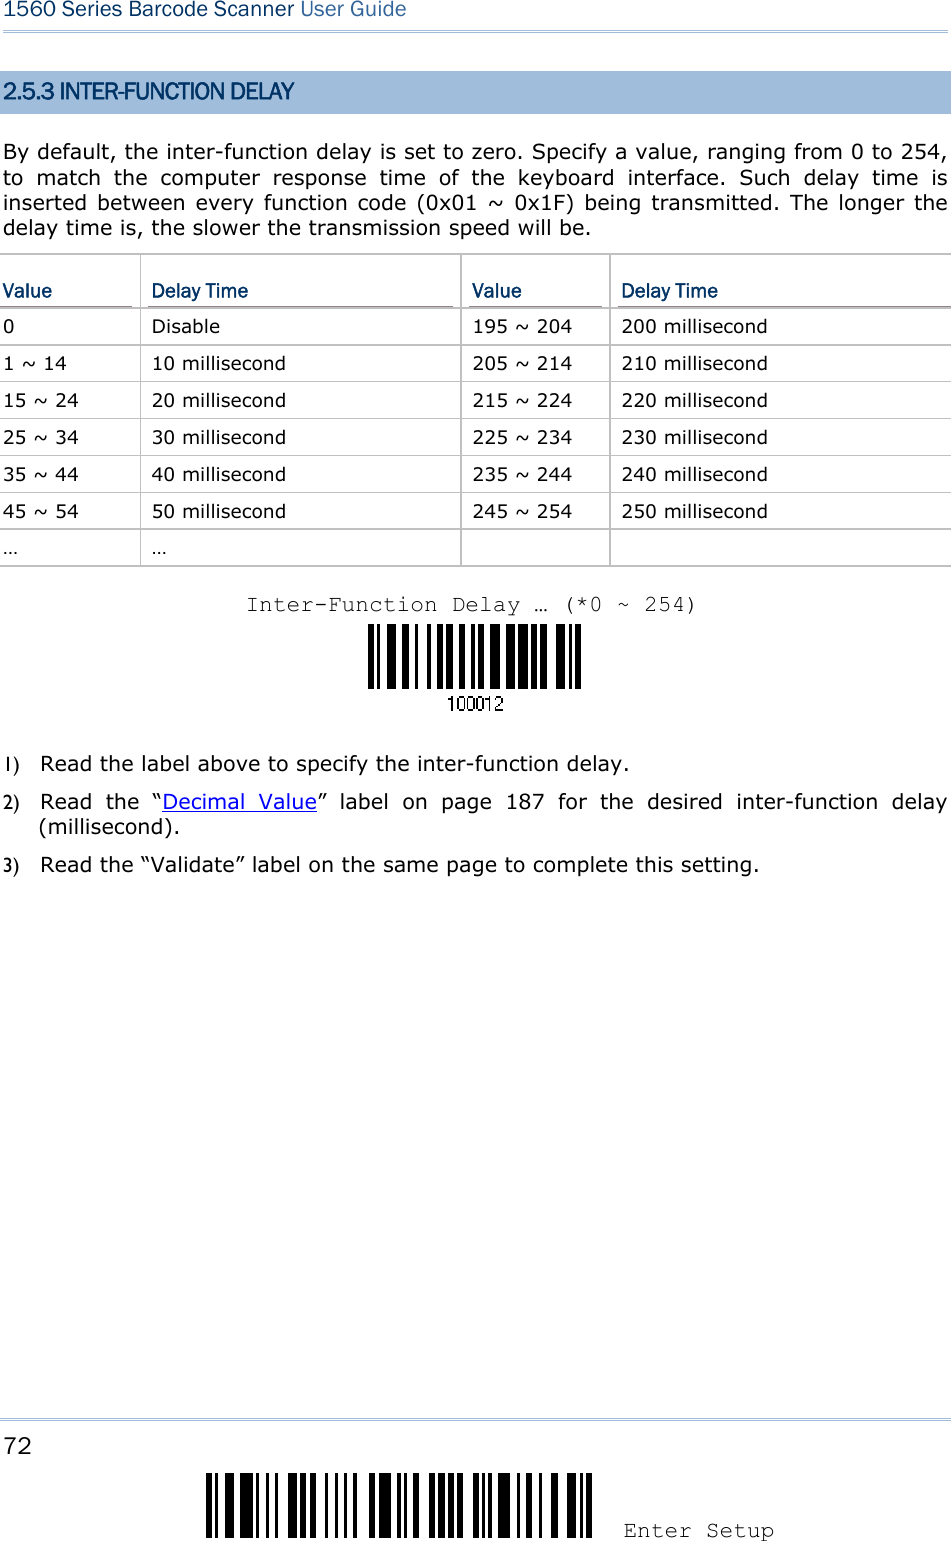 72 Enter Setup 1560 Series Barcode Scanner User Guide  2.5.3 INTER-FUNCTION DELAY By default, the inter-function delay is set to zero. Specify a value, ranging from 0 to 254, to match the computer response time of the keyboard interface. Such delay time is inserted between every function code (0x01 ~ 0x1F) being transmitted. The longer the delay time is, the slower the transmission speed will be. Value  Delay Time  Value  Delay Time 0  Disable  195 ~ 204  200 millisecond 1 ~ 14  10 millisecond  205 ~ 214  210 millisecond 15 ~ 24  20 millisecond  215 ~ 224  220 millisecond 25 ~ 34  30 millisecond  225 ~ 234  230 millisecond 35 ~ 44  40 millisecond  235 ~ 244  240 millisecond 45 ~ 54  50 millisecond  245 ~ 254  250 millisecond … …        1) Read the label above to specify the inter-function delay.       2) Read the “Decimal Value” label on page 187 for the desired inter-function delay (millisecond).  3) Read the “Validate” label on the same page to complete this setting.        Inter-Function Delay … (*0 ~ 254)